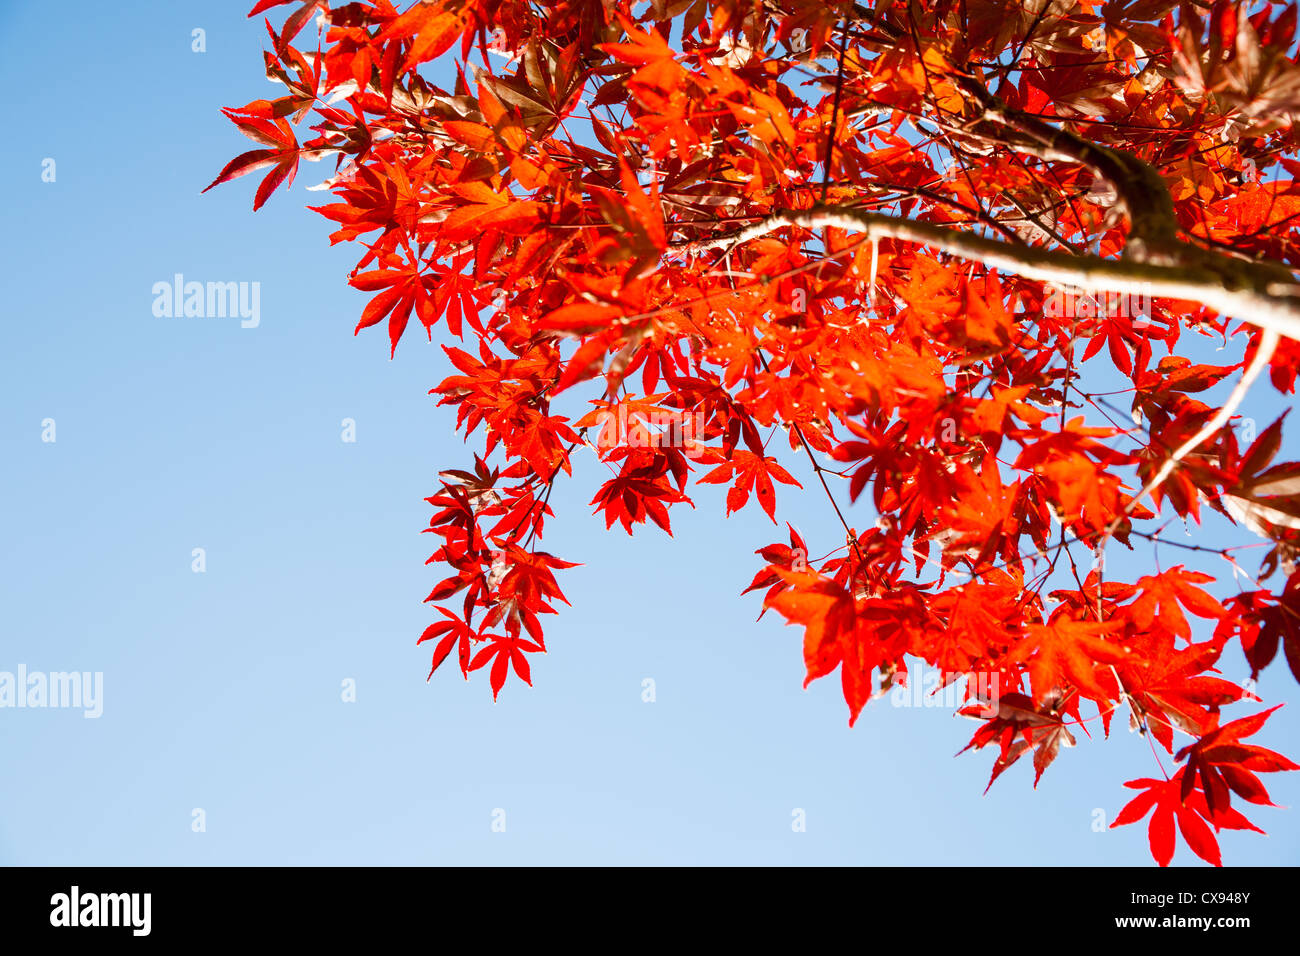 Bright red maple tree leaves against blue sky. Stock Photo